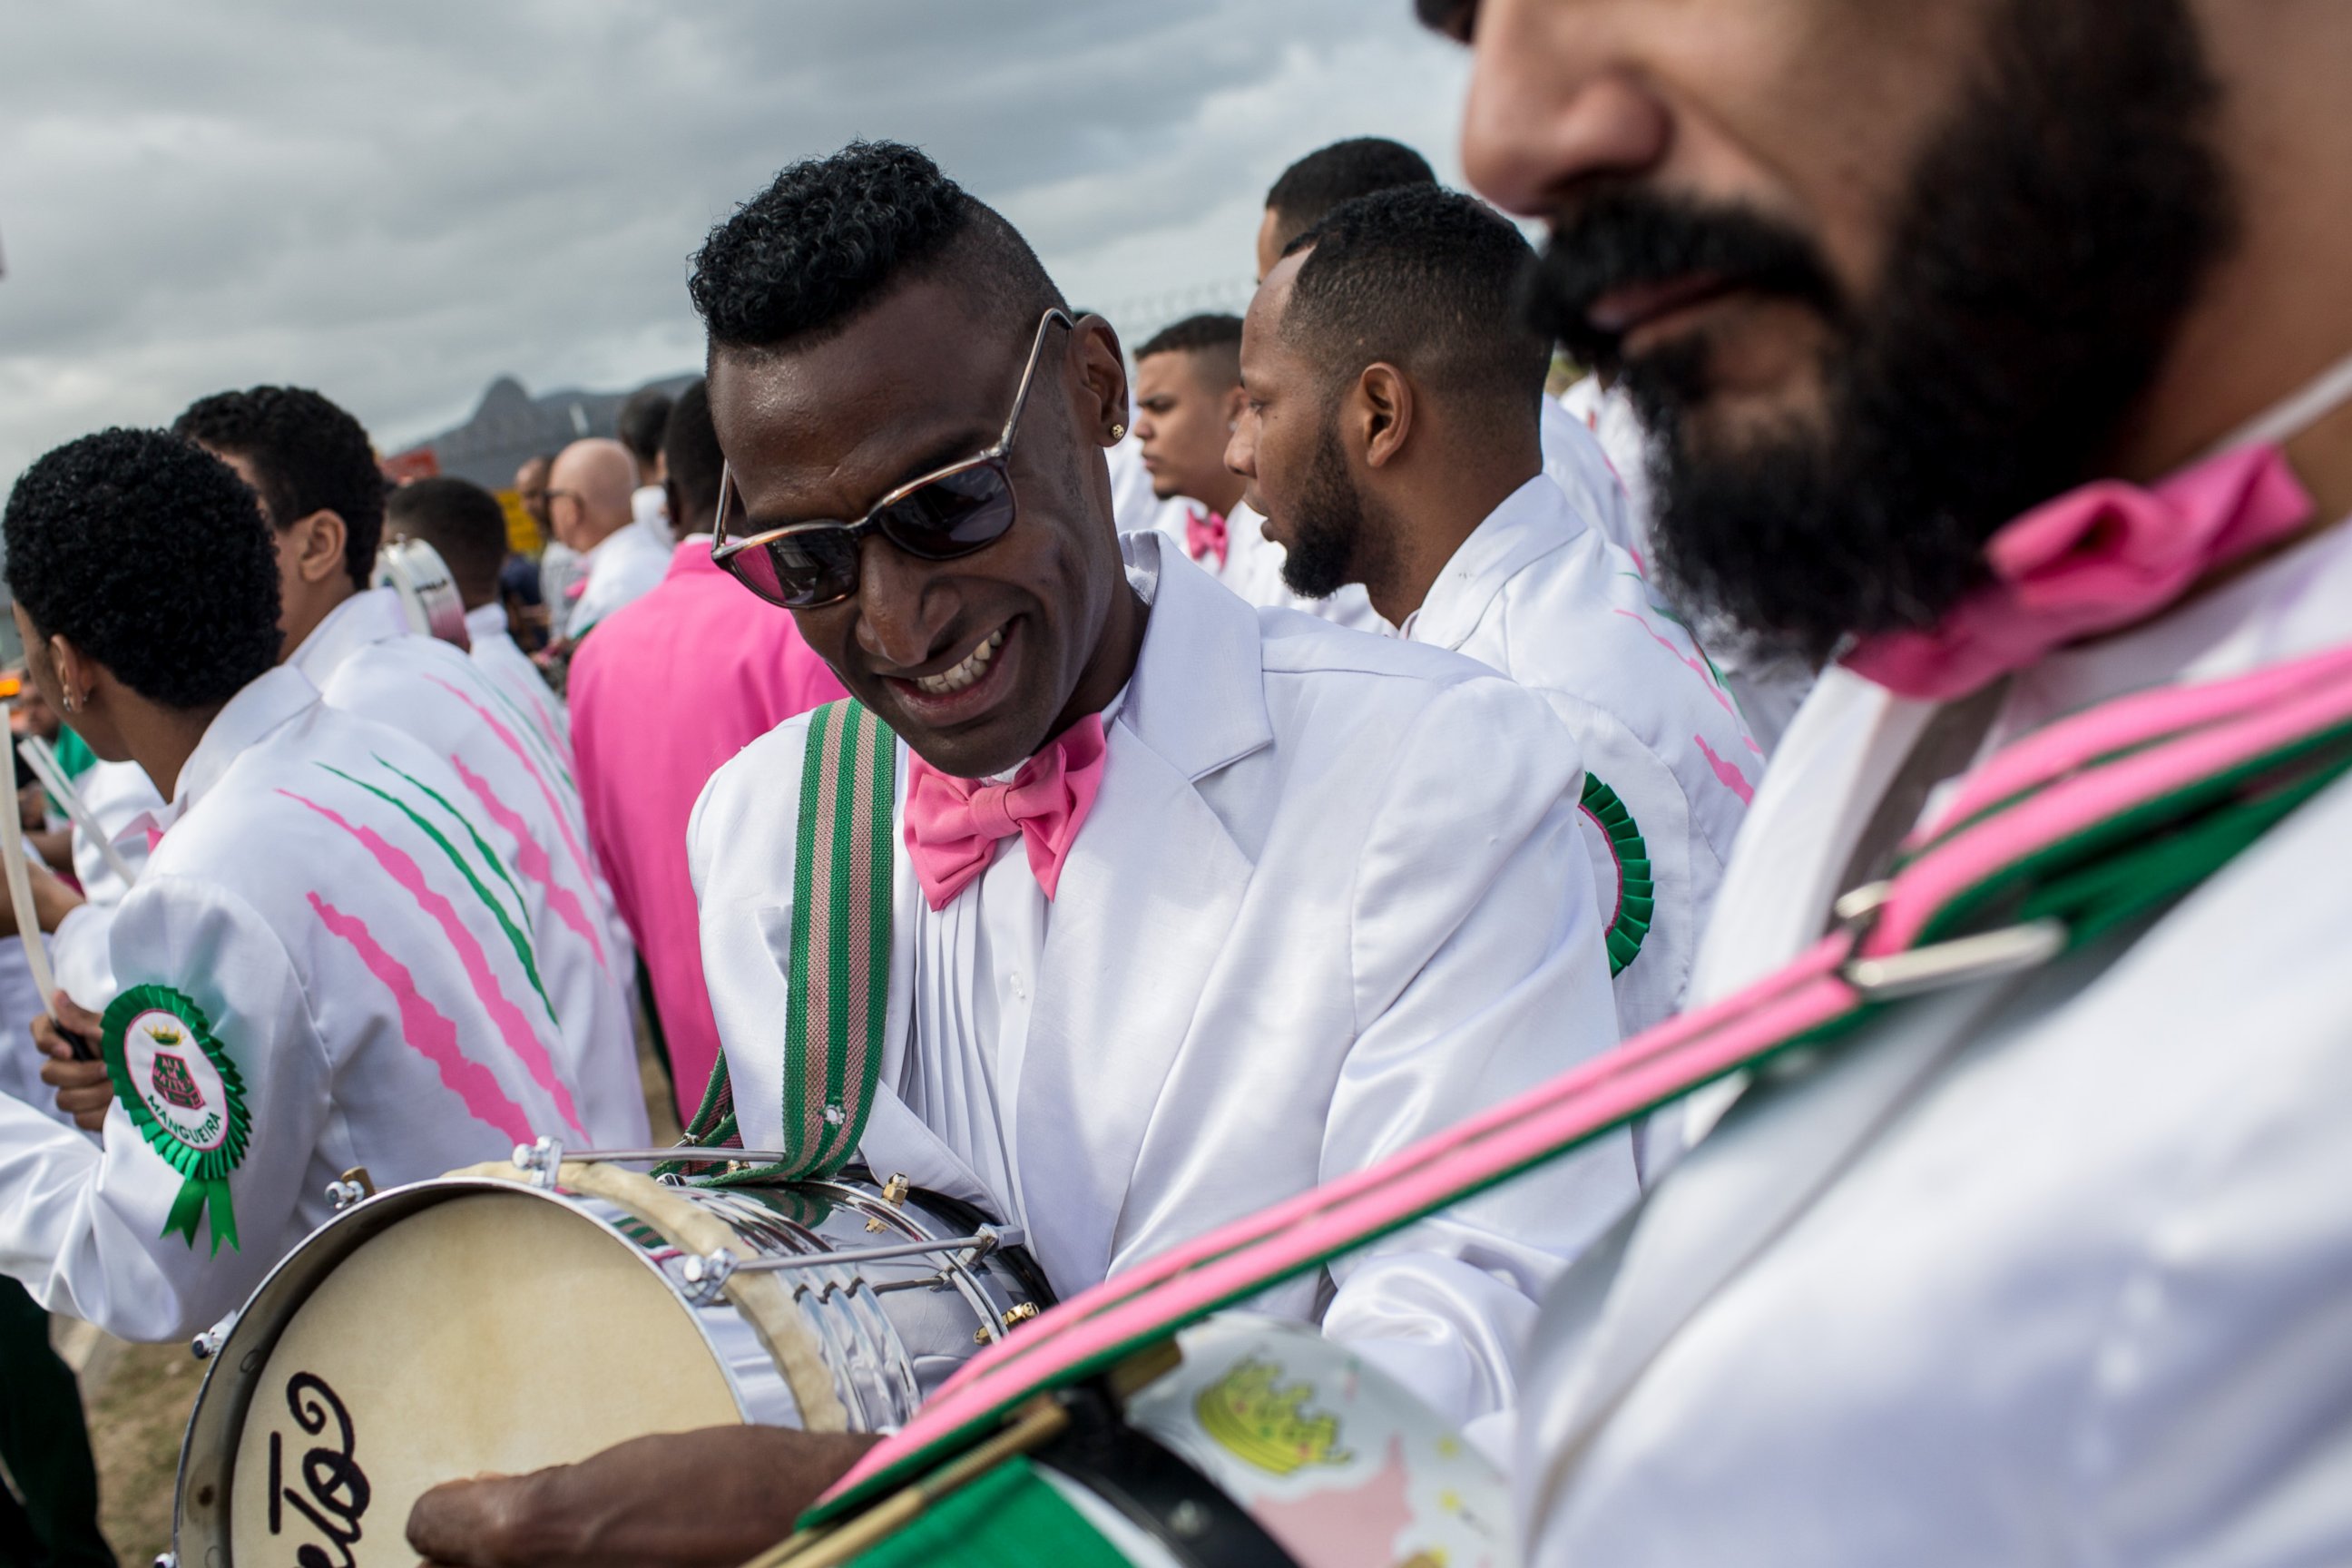 PHOTO: Band members from the Mangueira samba school play music while waiting for the arrival of the Olympic flame ahead of the Rio 2016 Olympic Games , August 3, 2016 in Rio de Janeiro, Brazil. 